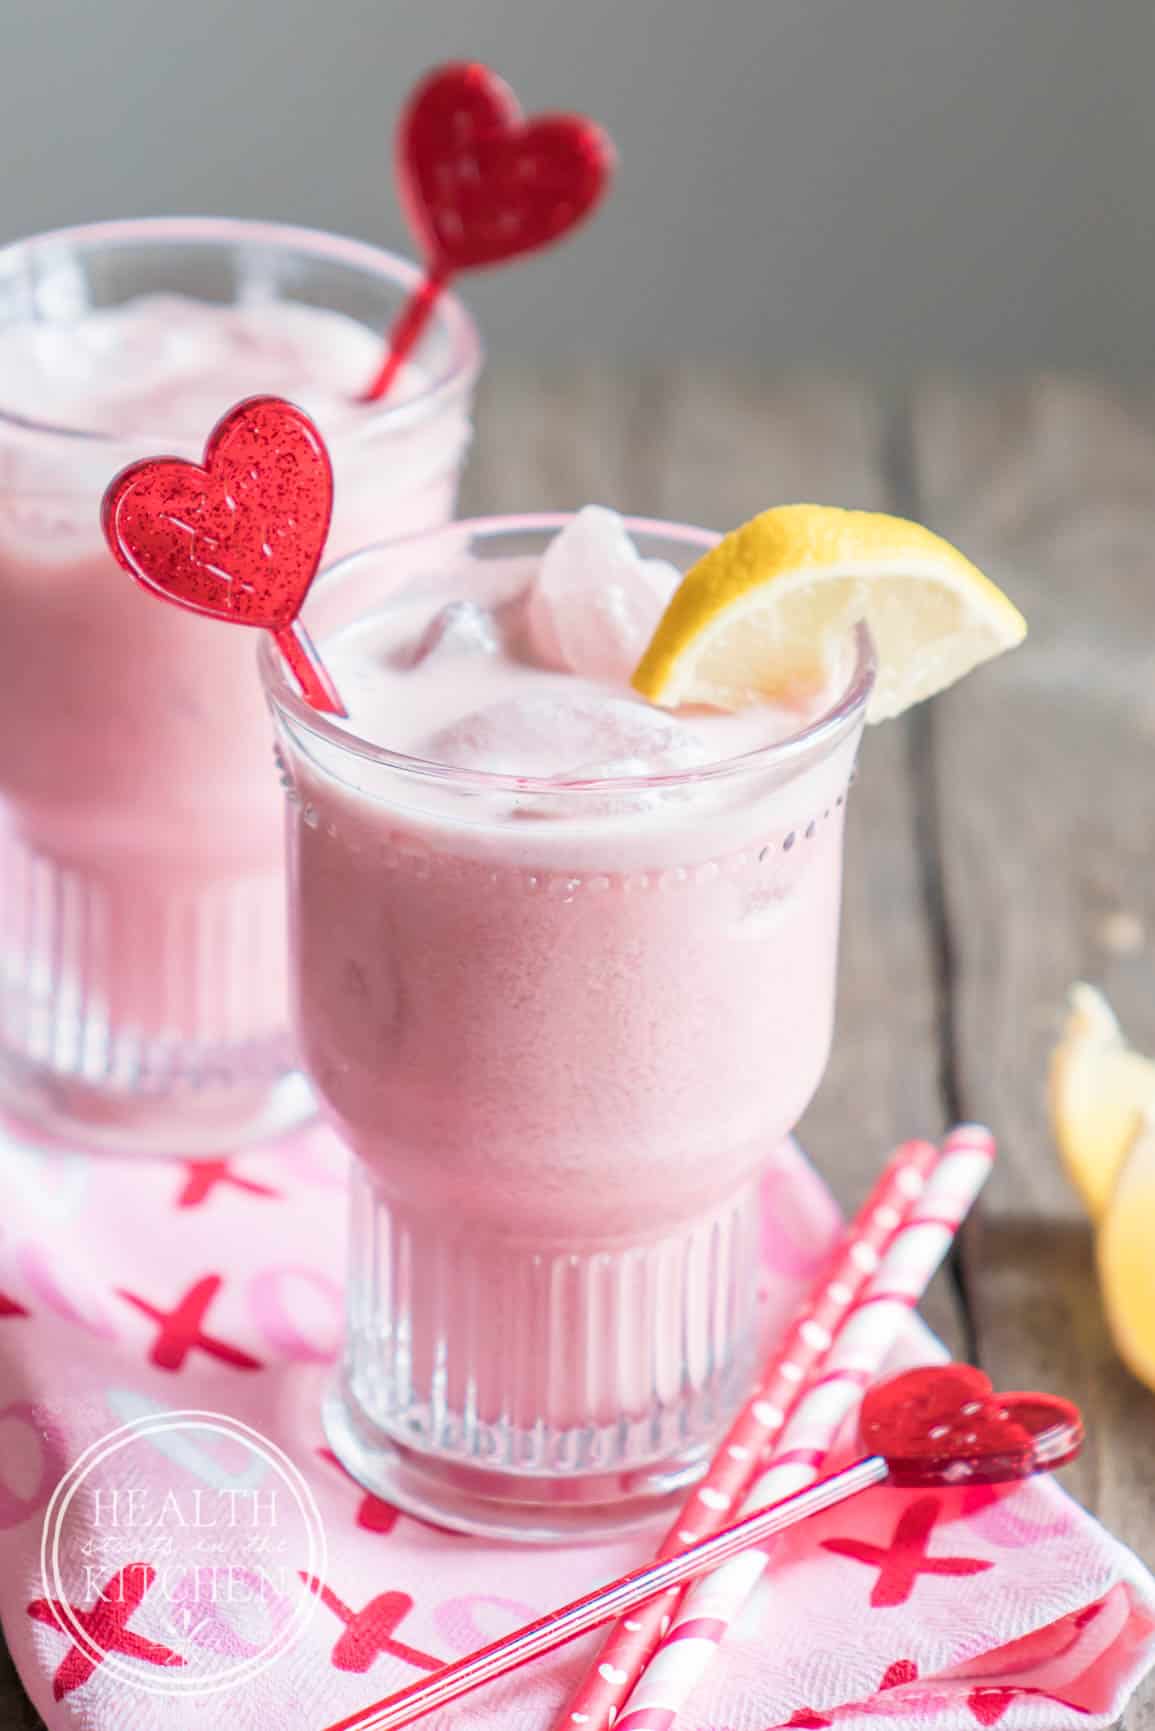 Keto Pink Passion Hibiscus Iced Latte - Healthier than Starbucks with NO GMOs and Low in Carbs, Keto Friendly